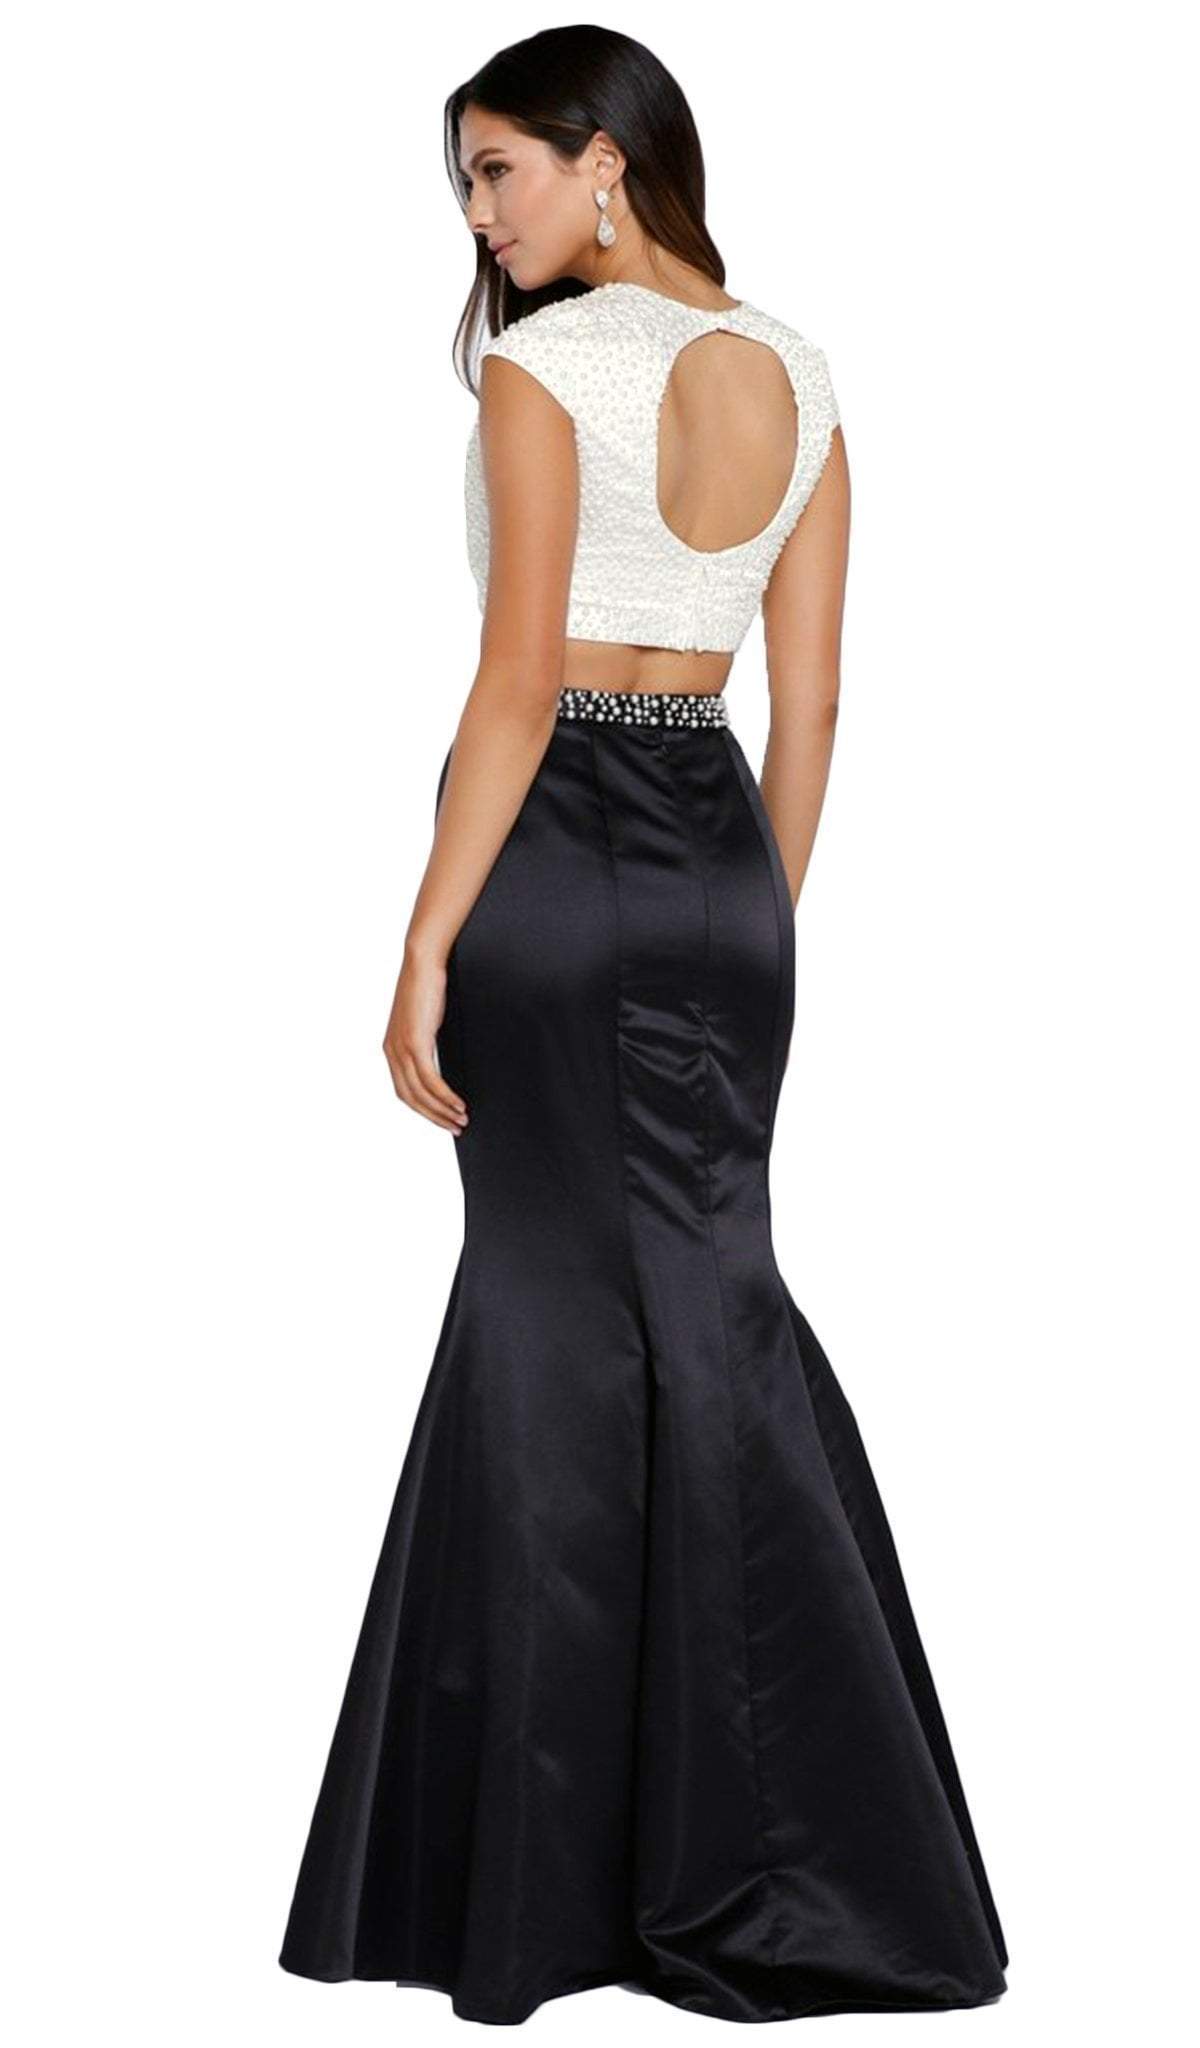 Nox Anabel - 8227 Two-Piece Pearl Embellished Gown Special Occasion Dress XS / Black & Ivory